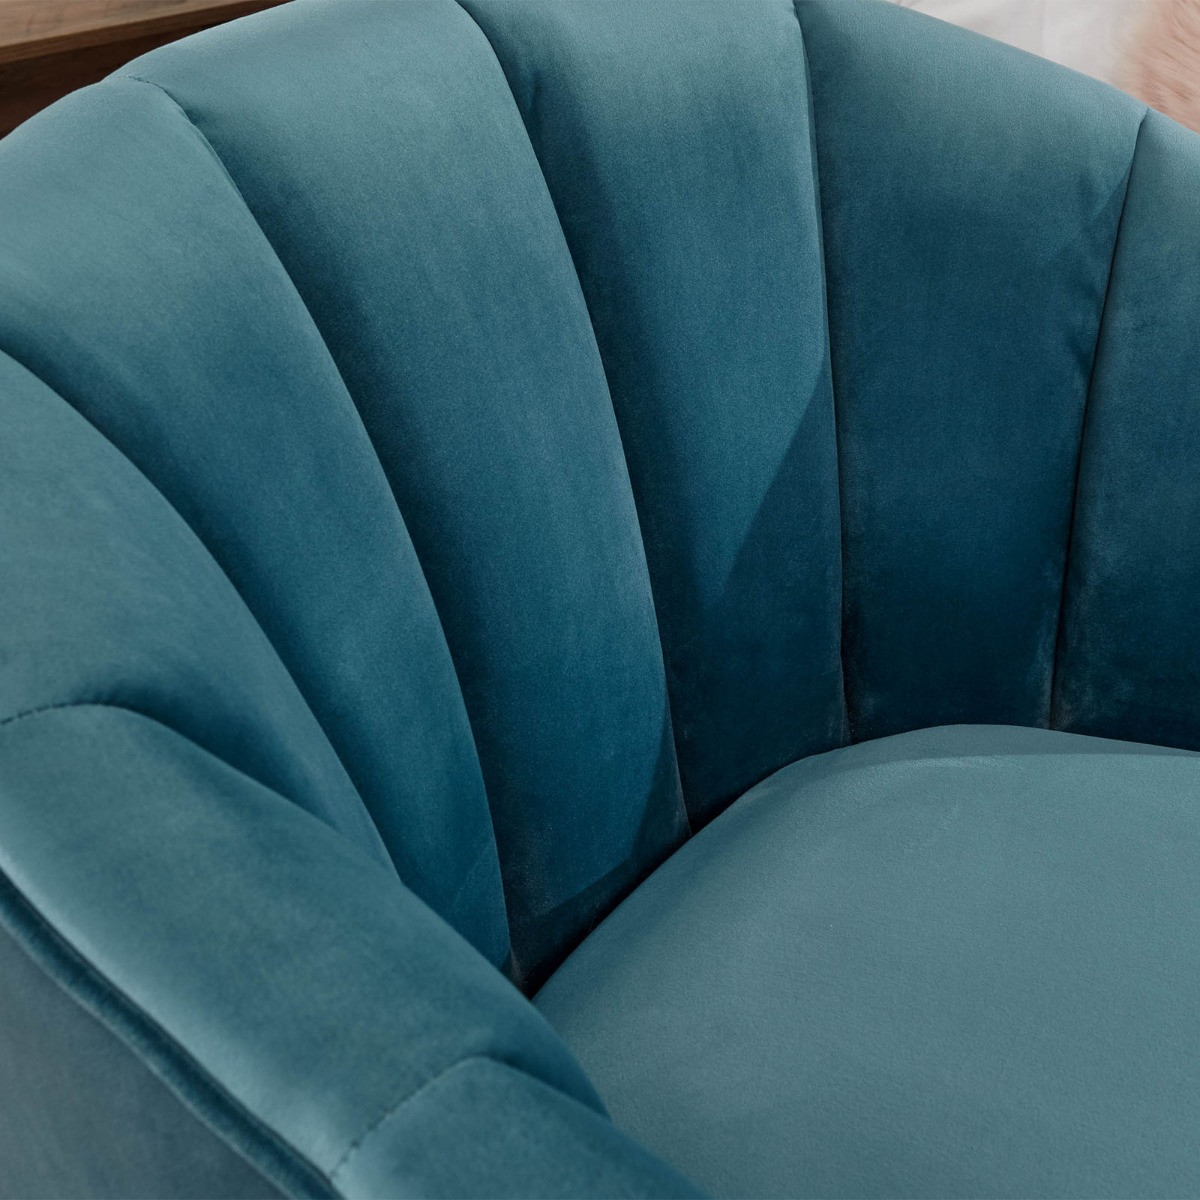 Pettine Upholstered Fabric Accent Chair - Teal>